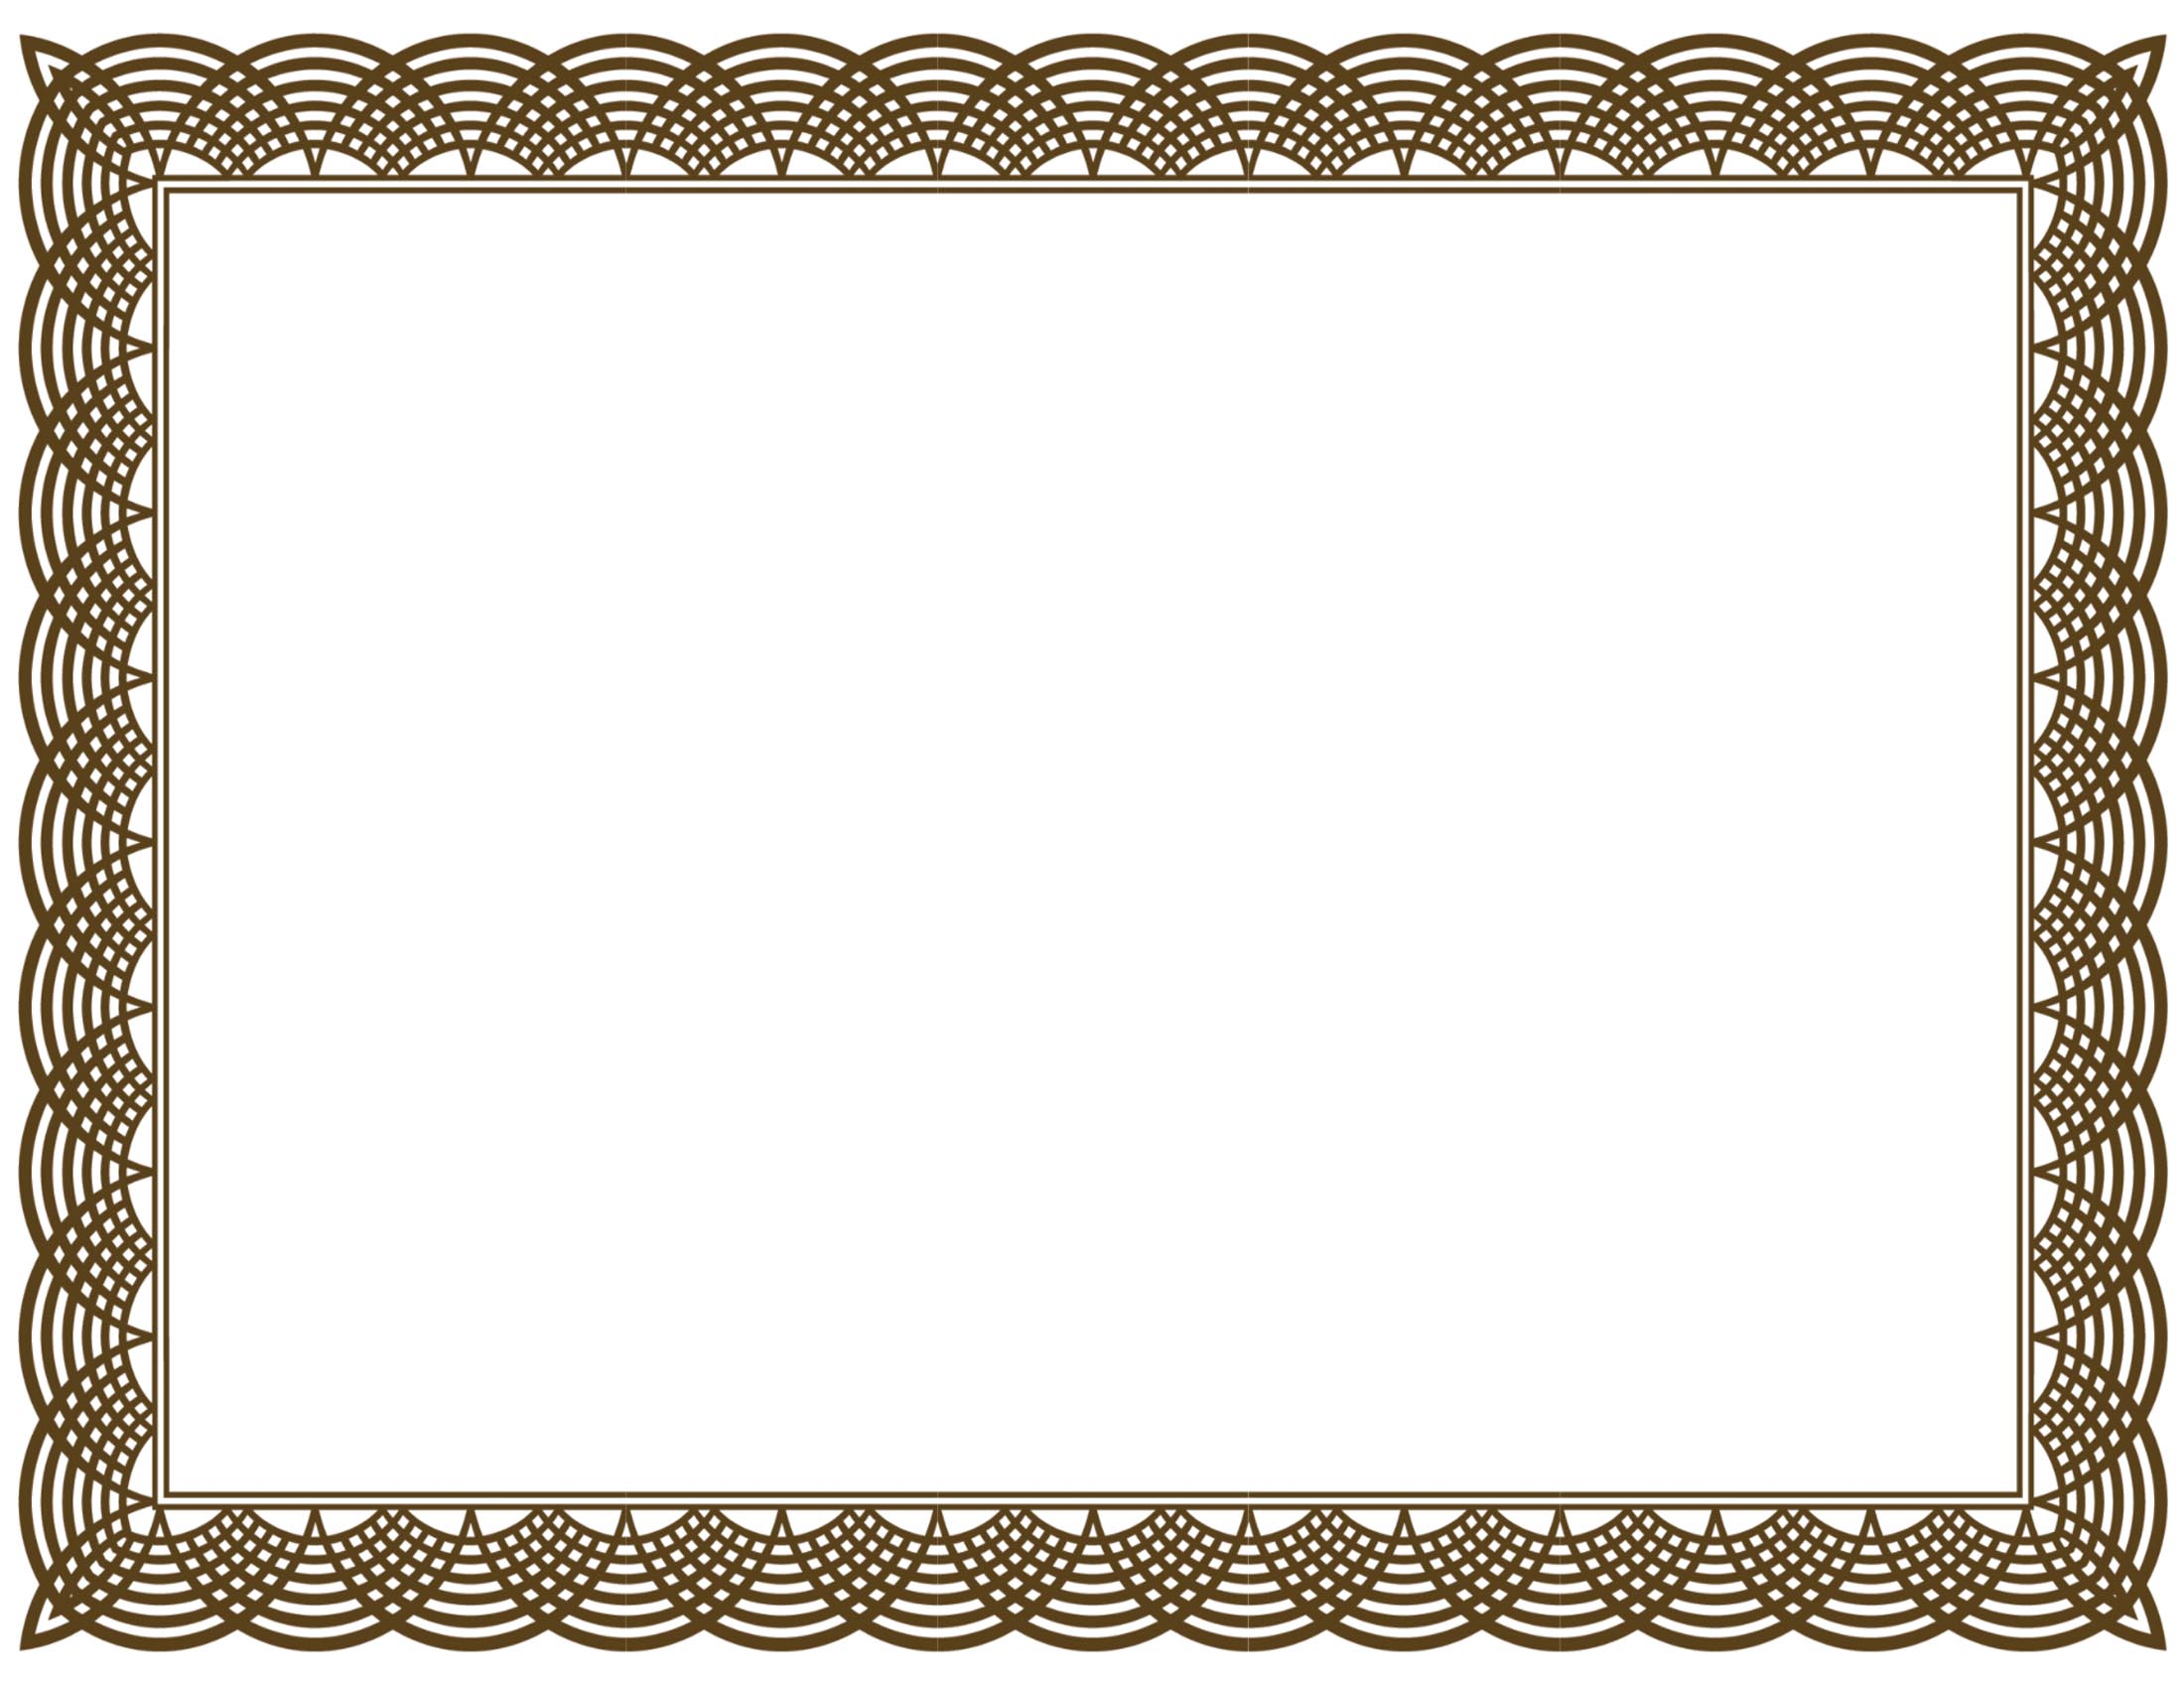 Certificate Border Wallpapers - Wallpaper Cave For Free Printable Certificate Border Templates